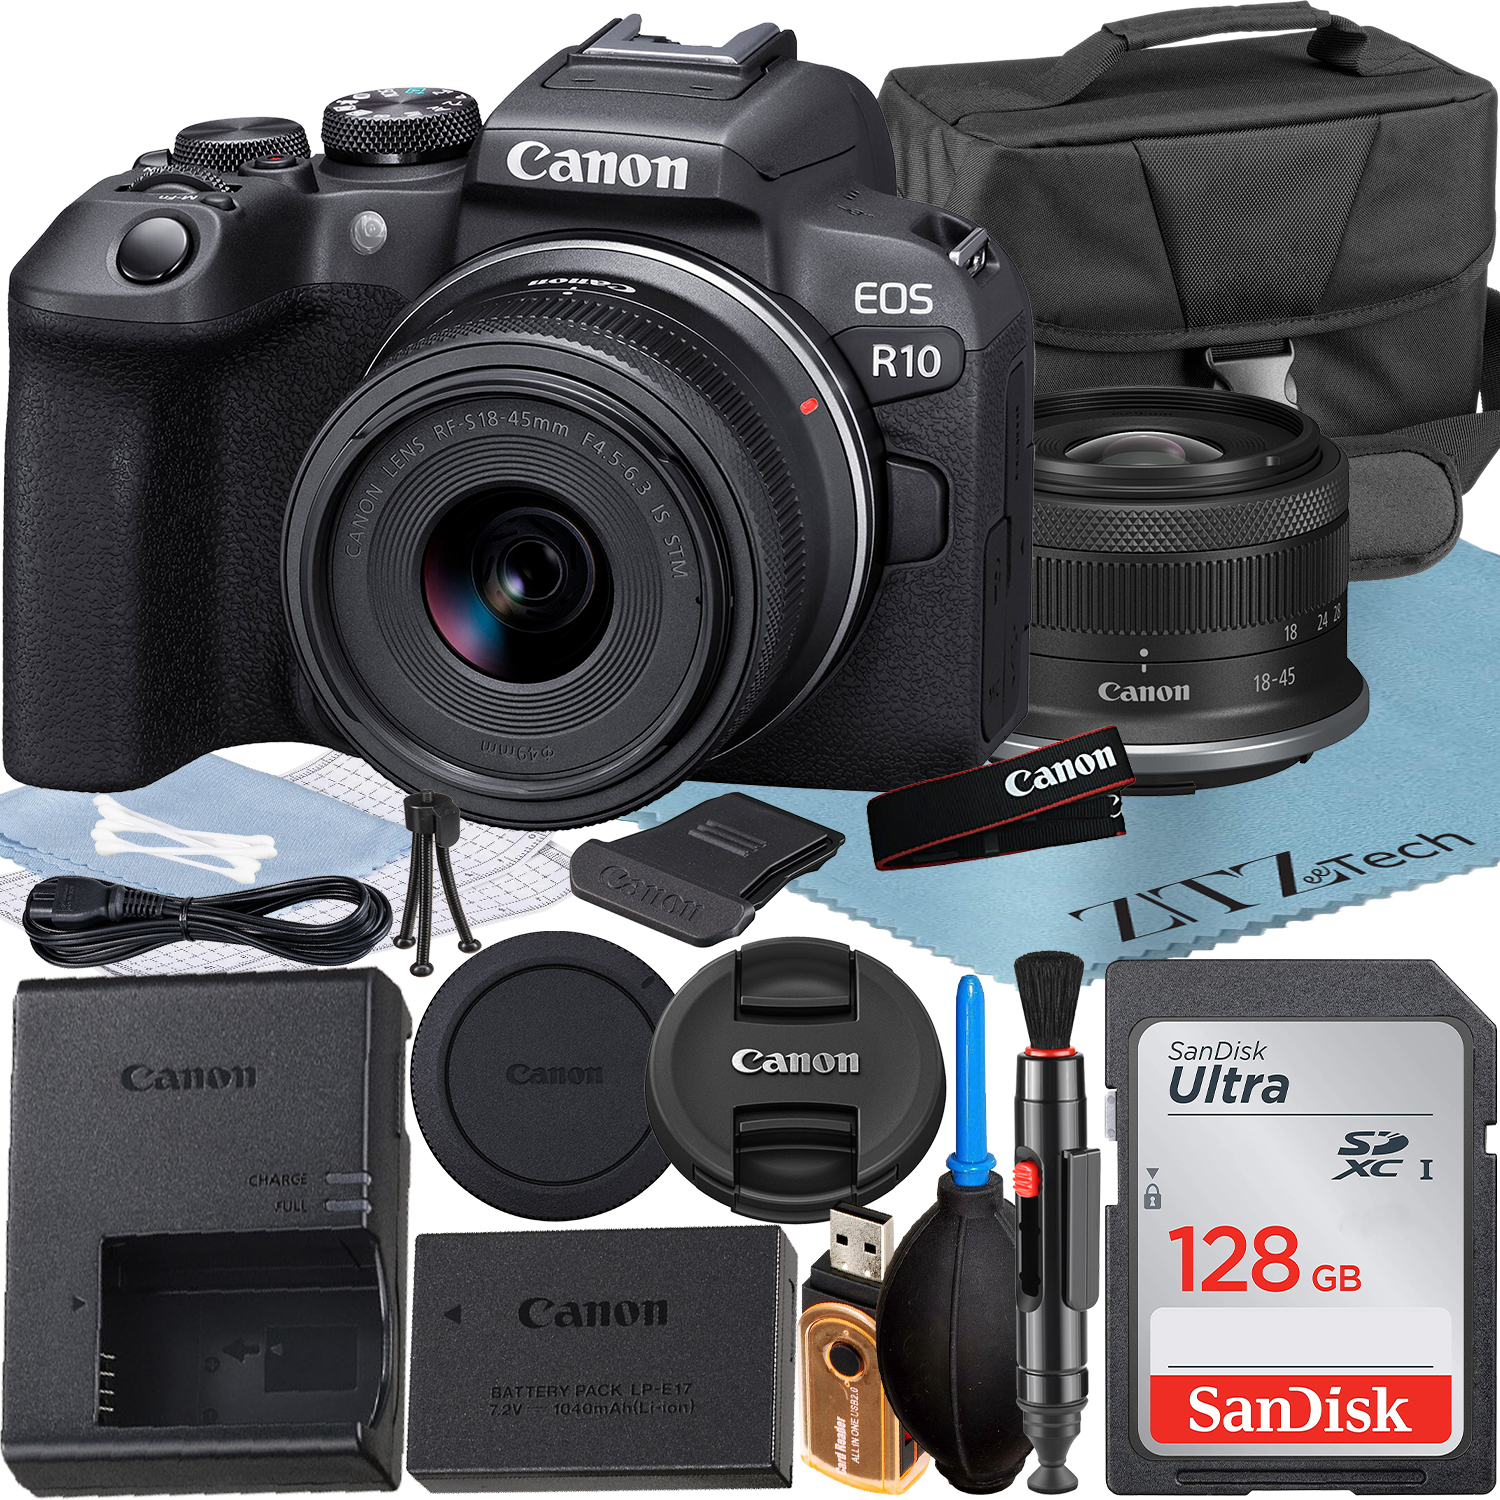 Canon EOS R10 Mirrorless Camera with RF-S 18-45mm Lens + SanDisk 128GB Memory Card + Case + ZeeTech Accessory Bundle